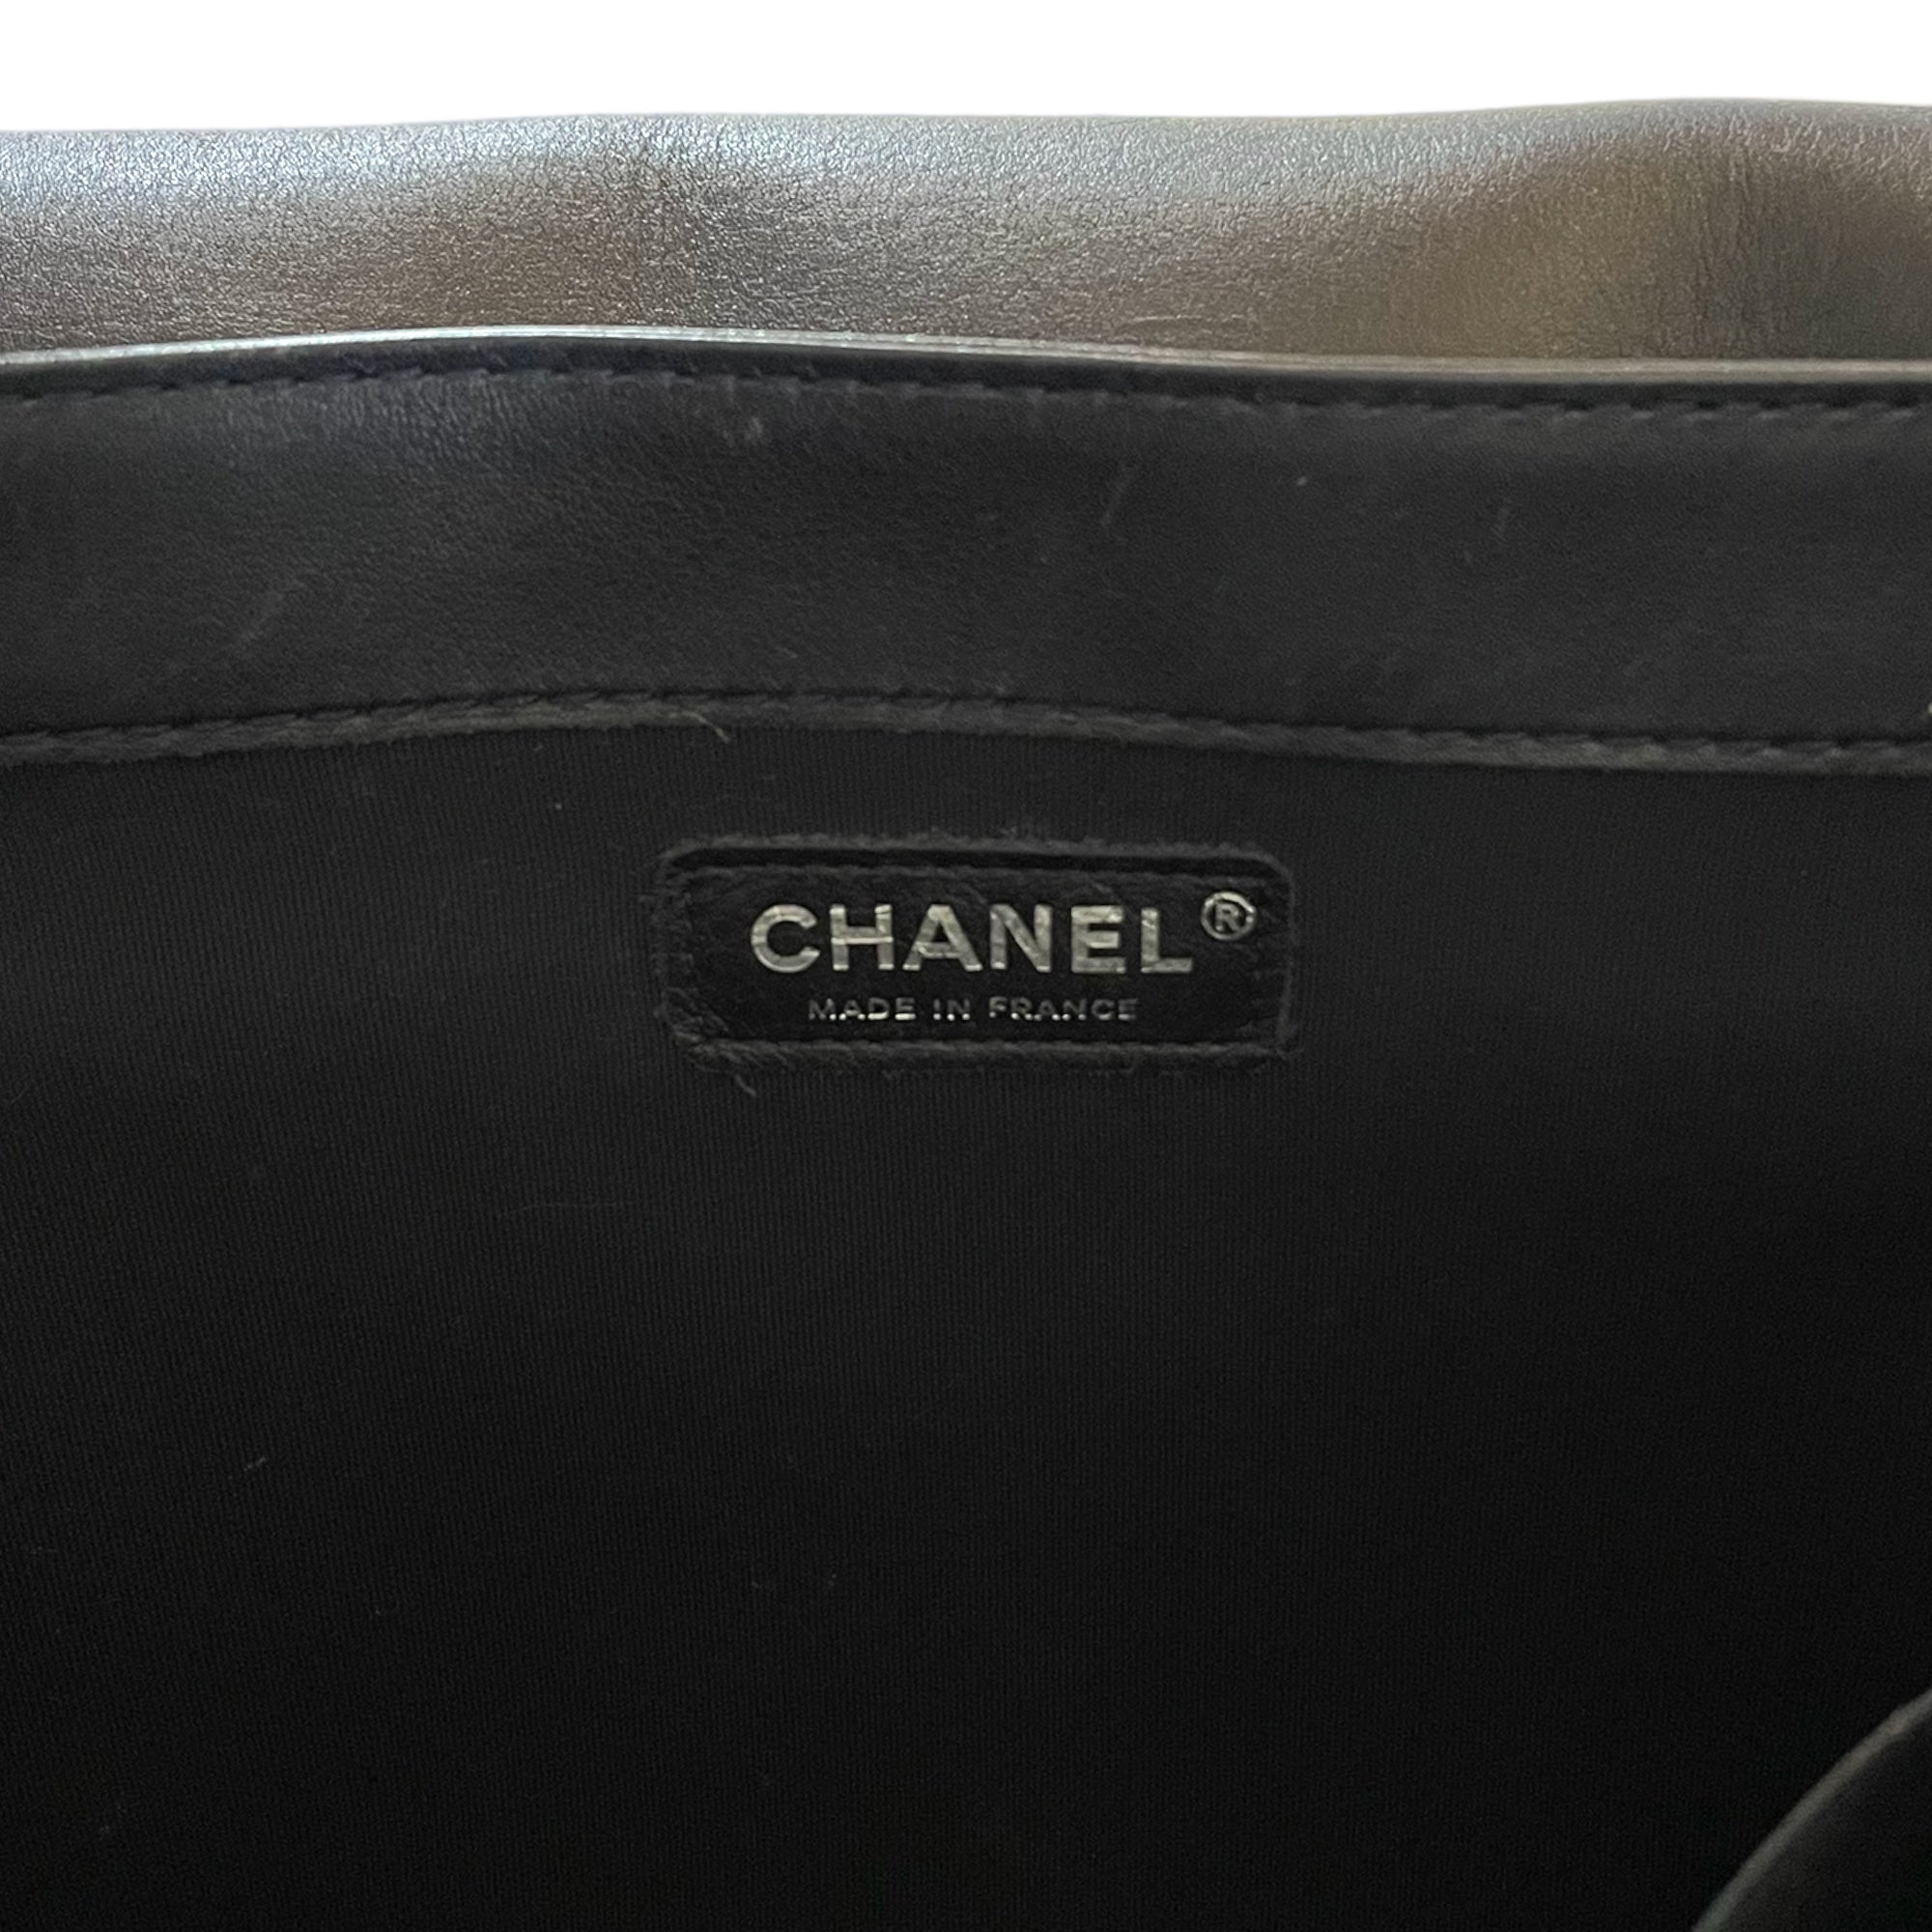 CHANEL Reverso Boy Flap Bag Patent Large in Midnight Blue